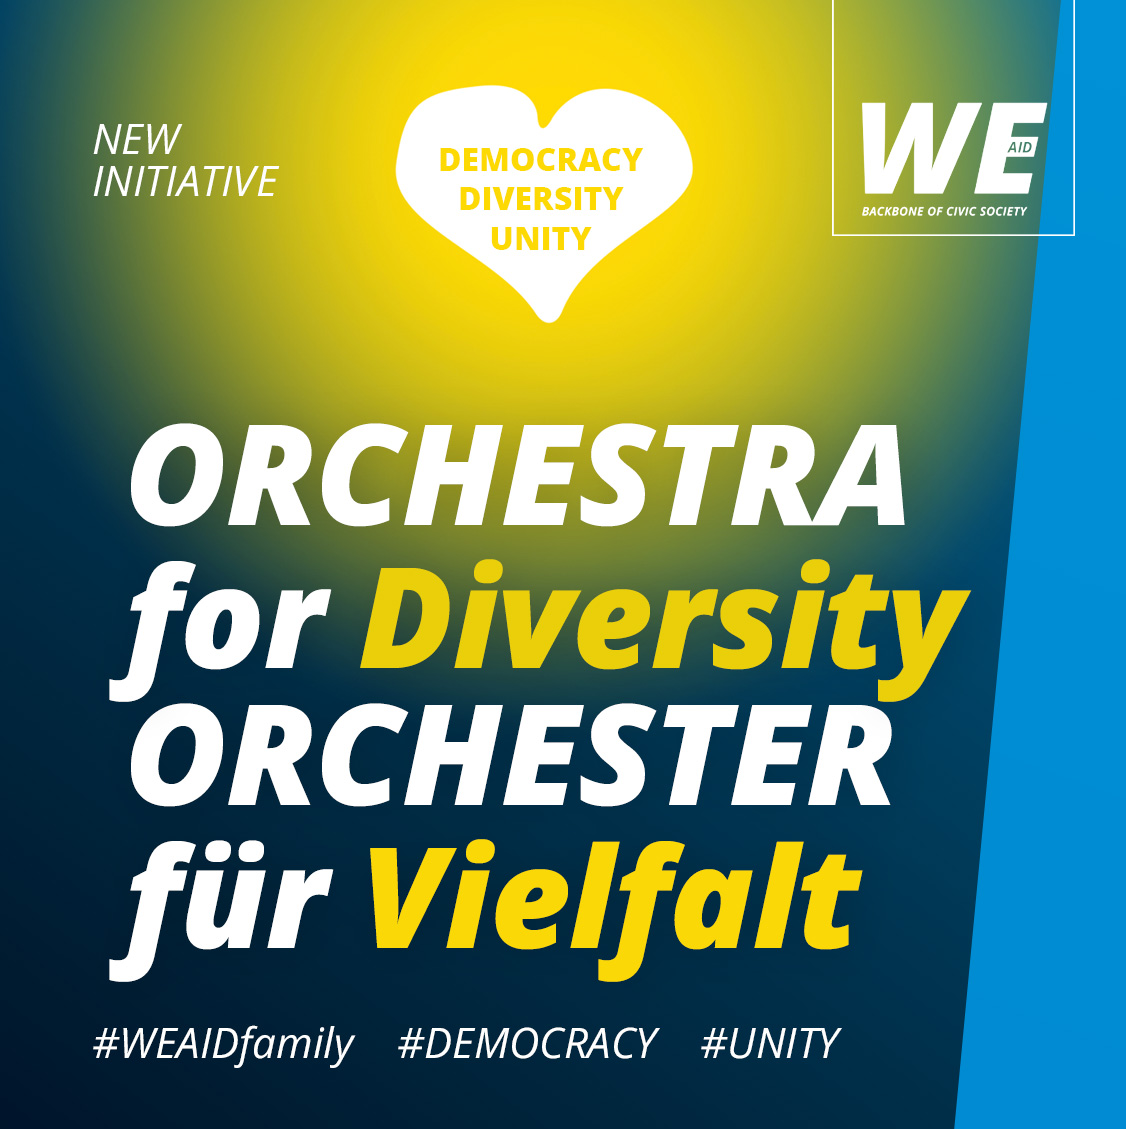 ORCHESTRA FOR DIVERSITY – Orchester für Vielfalt - Initiative supported by WE AID